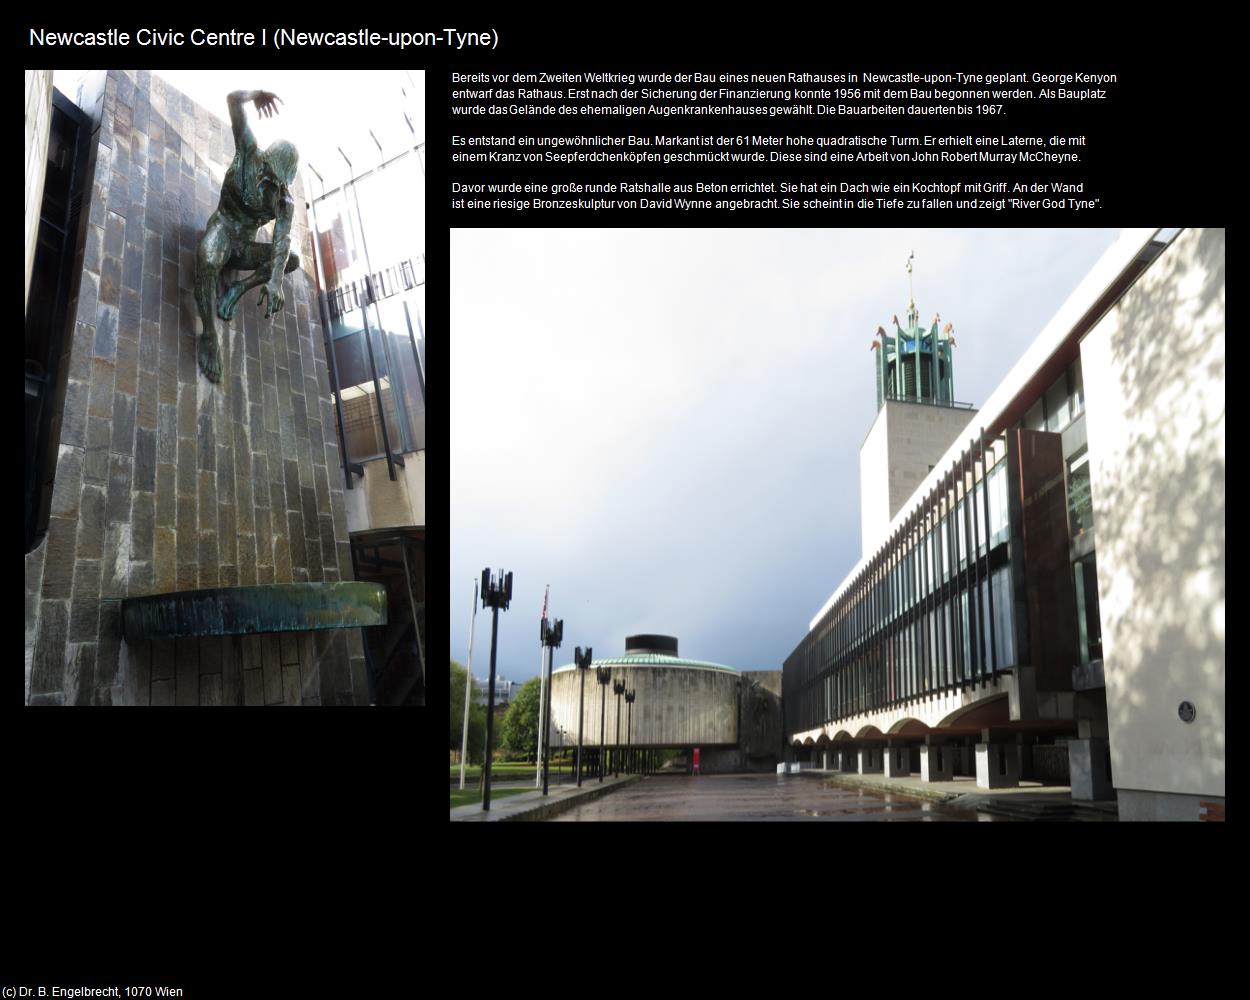 Newcastle Civic Centre I  (Newcastle-upon-Tyne, England) in Kulturatlas-ENGLAND und WALES